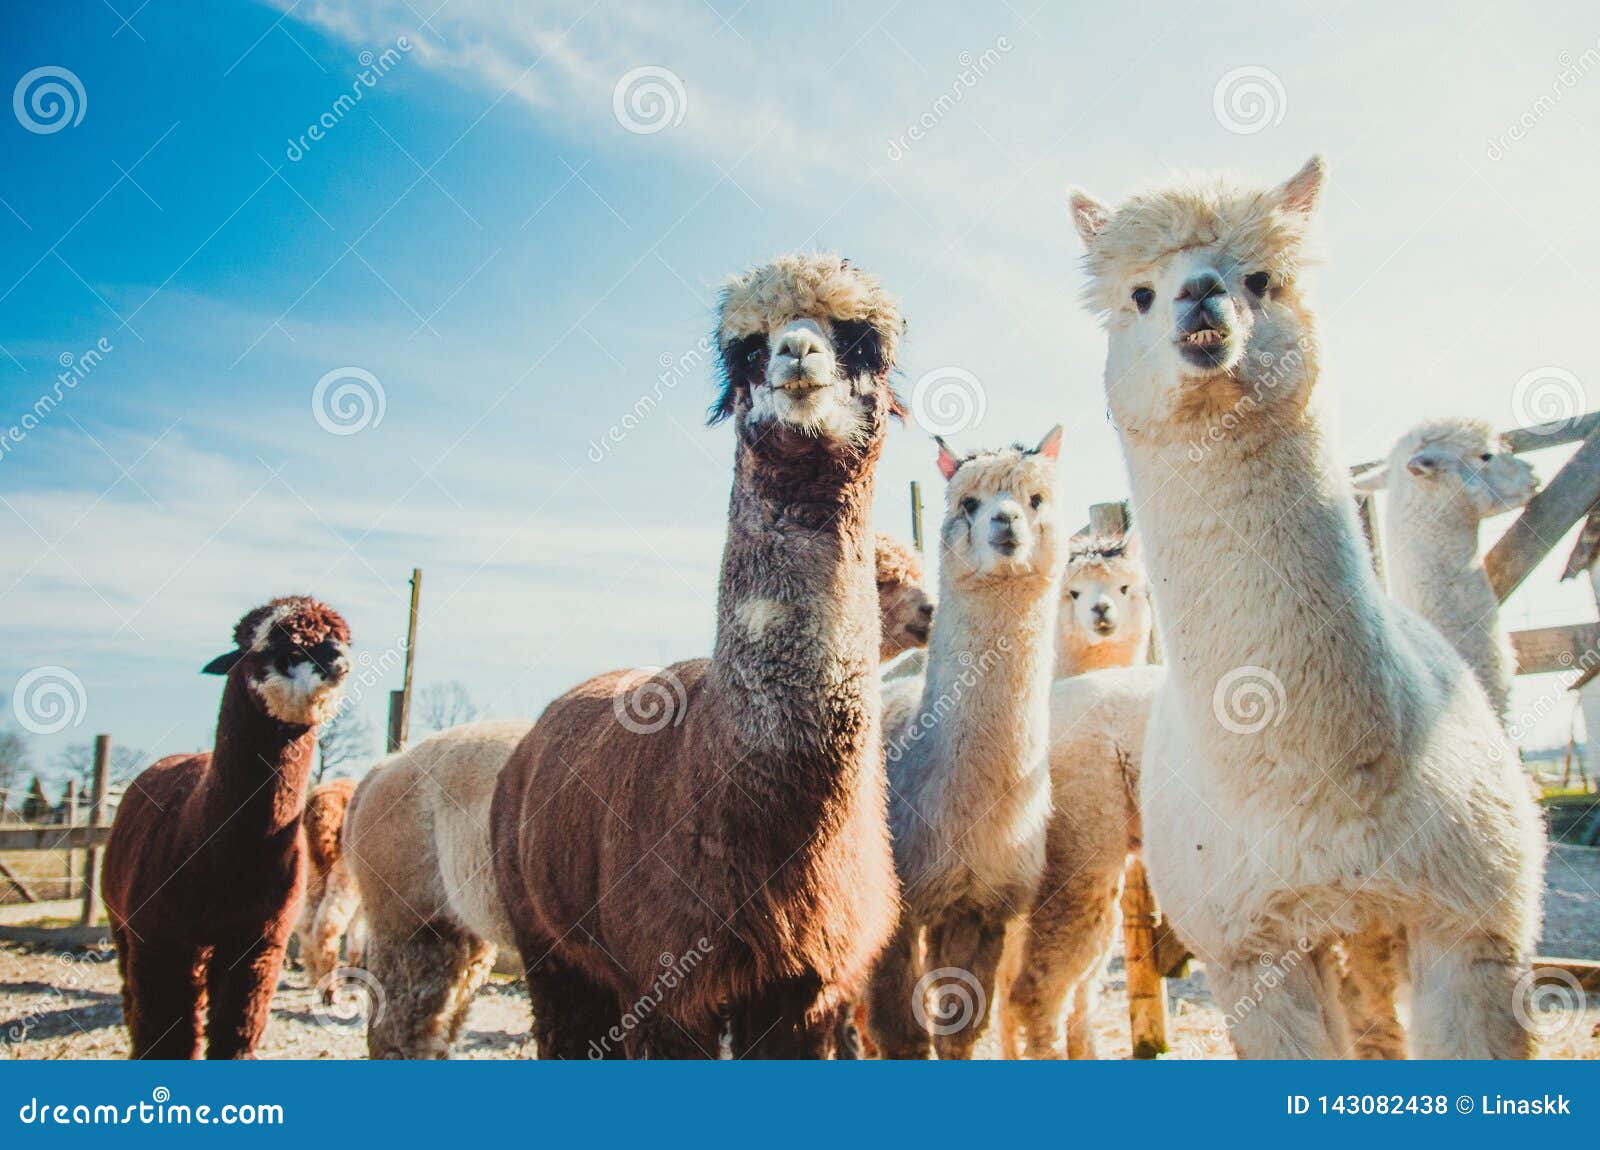 2 710 Cute Alpacas Photos Free Royalty Free Stock Photos From Dreamstime